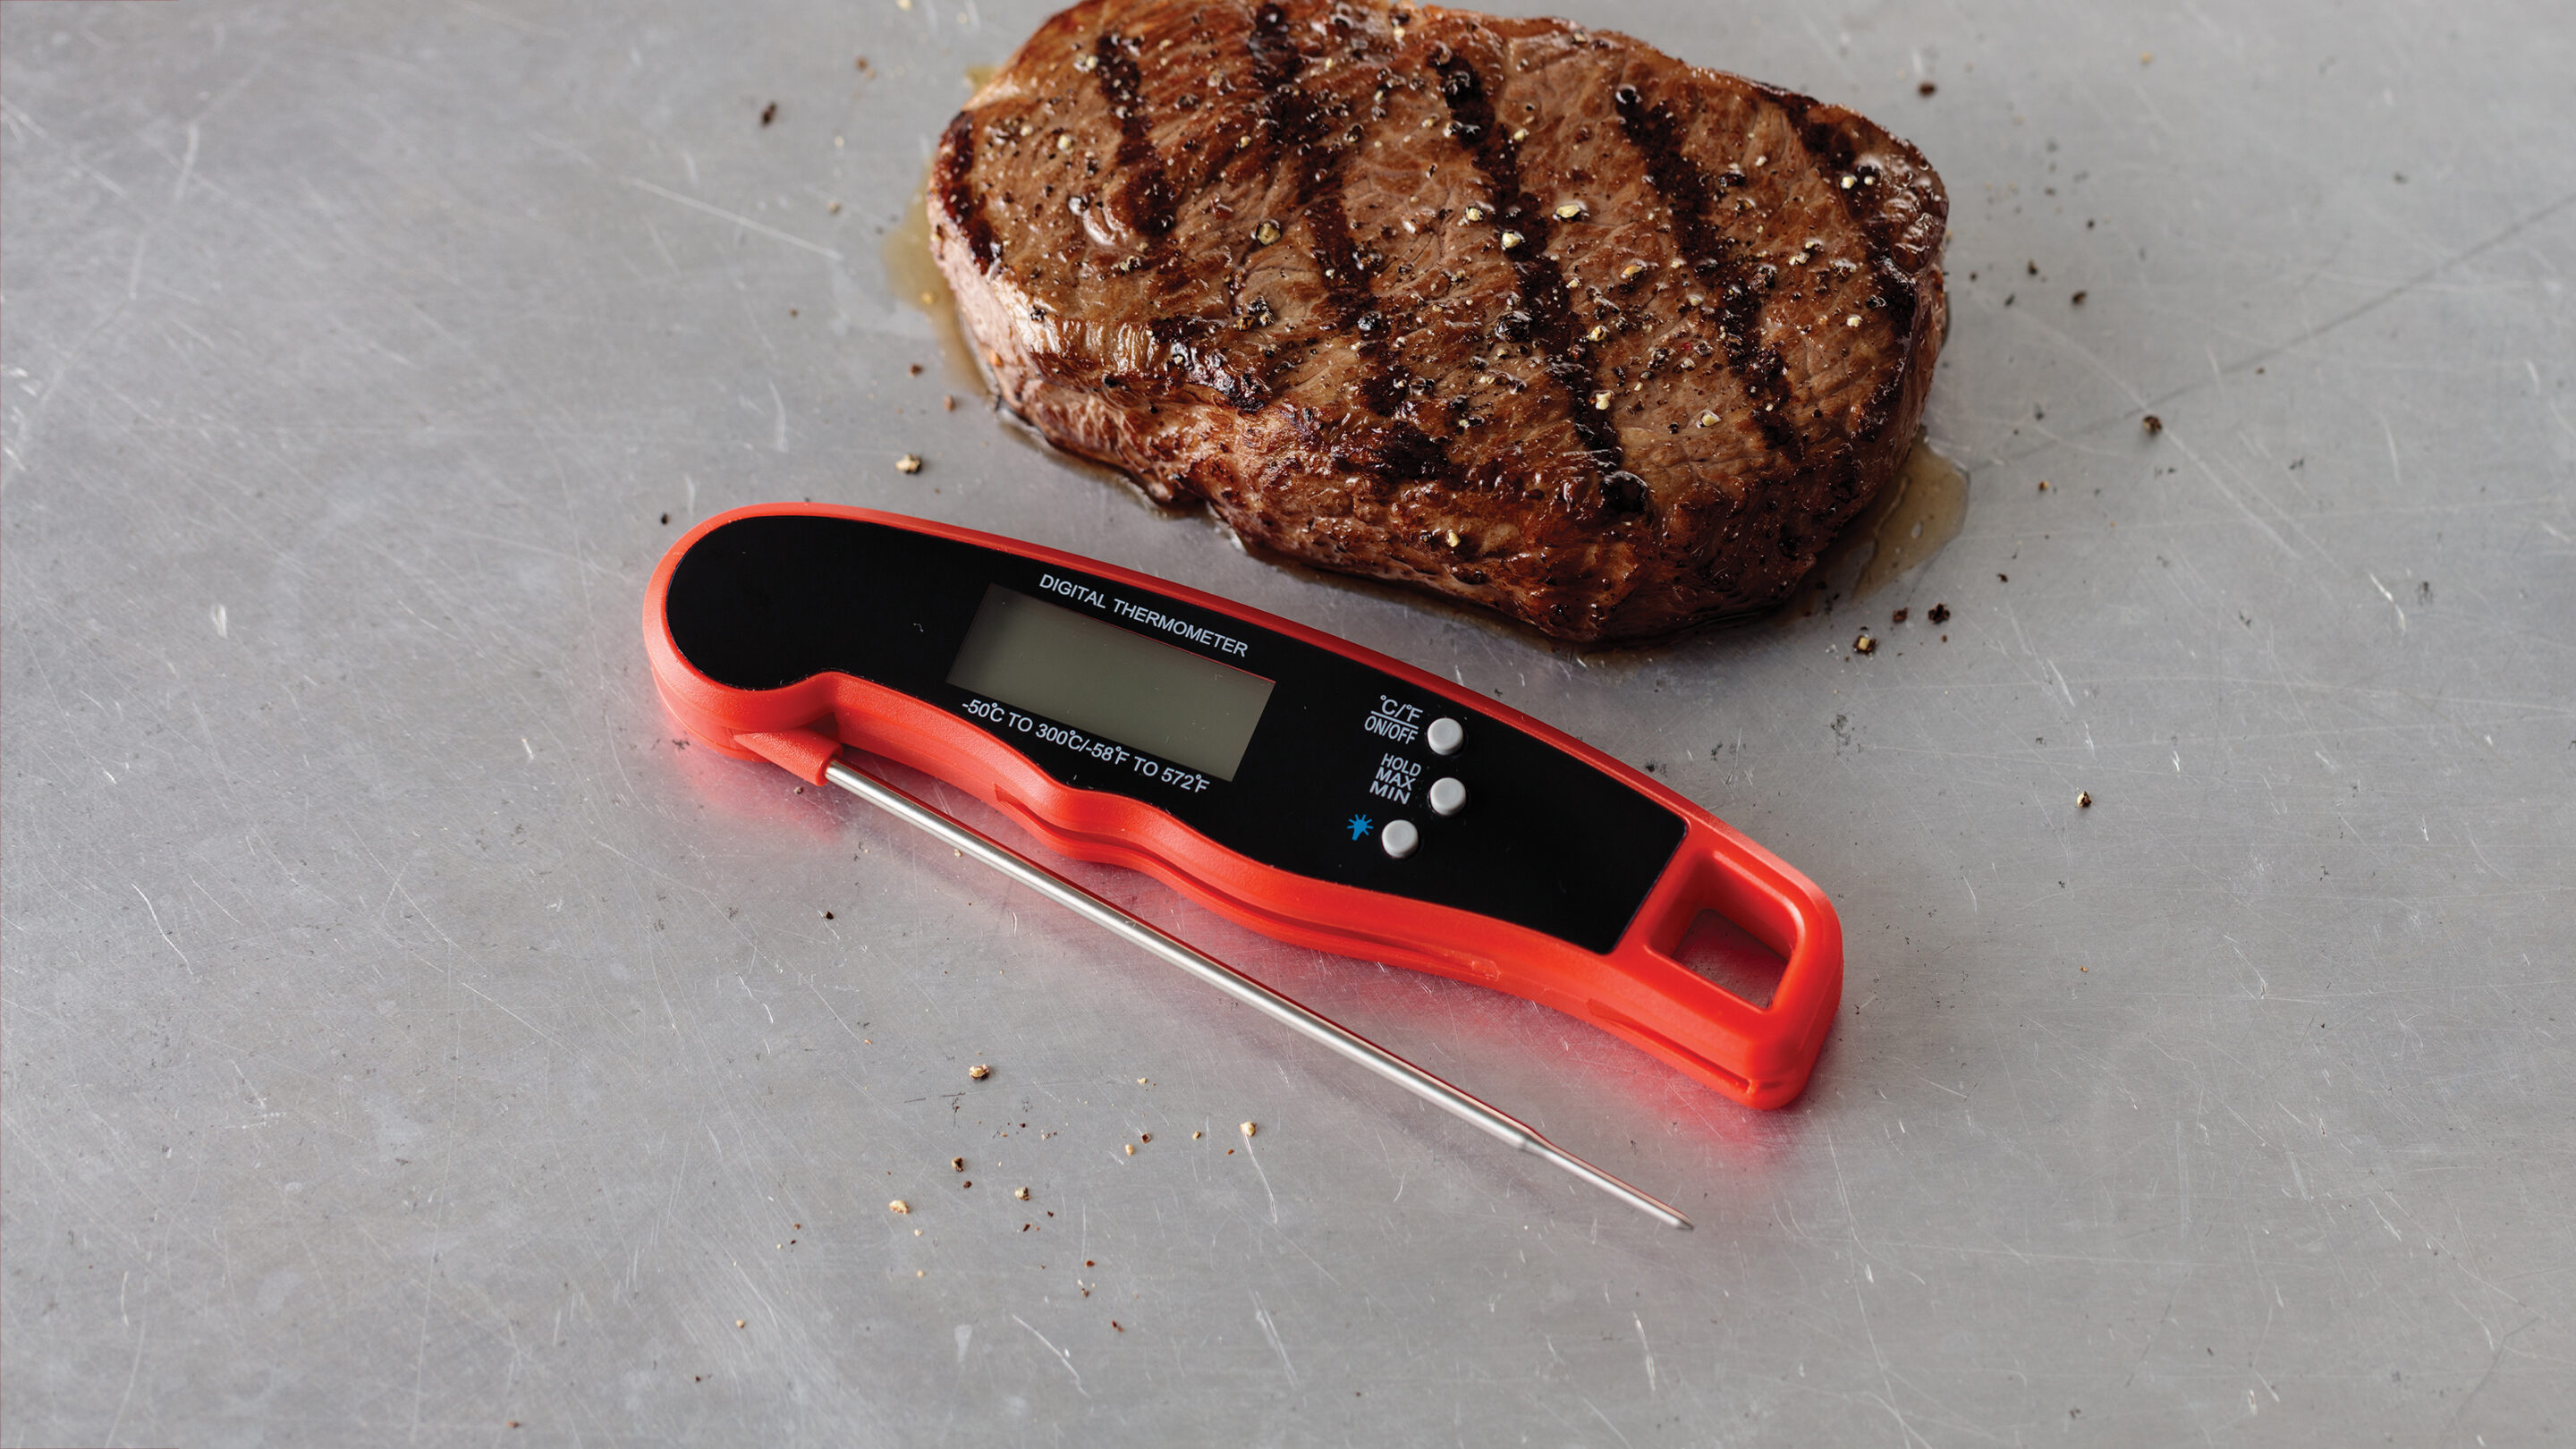 https://blog-content.omahasteaks.com/wp-content/uploads/2022/06/blogwp_12-essential-tools-for-a-great-grill-kit-scaled-1.jpg